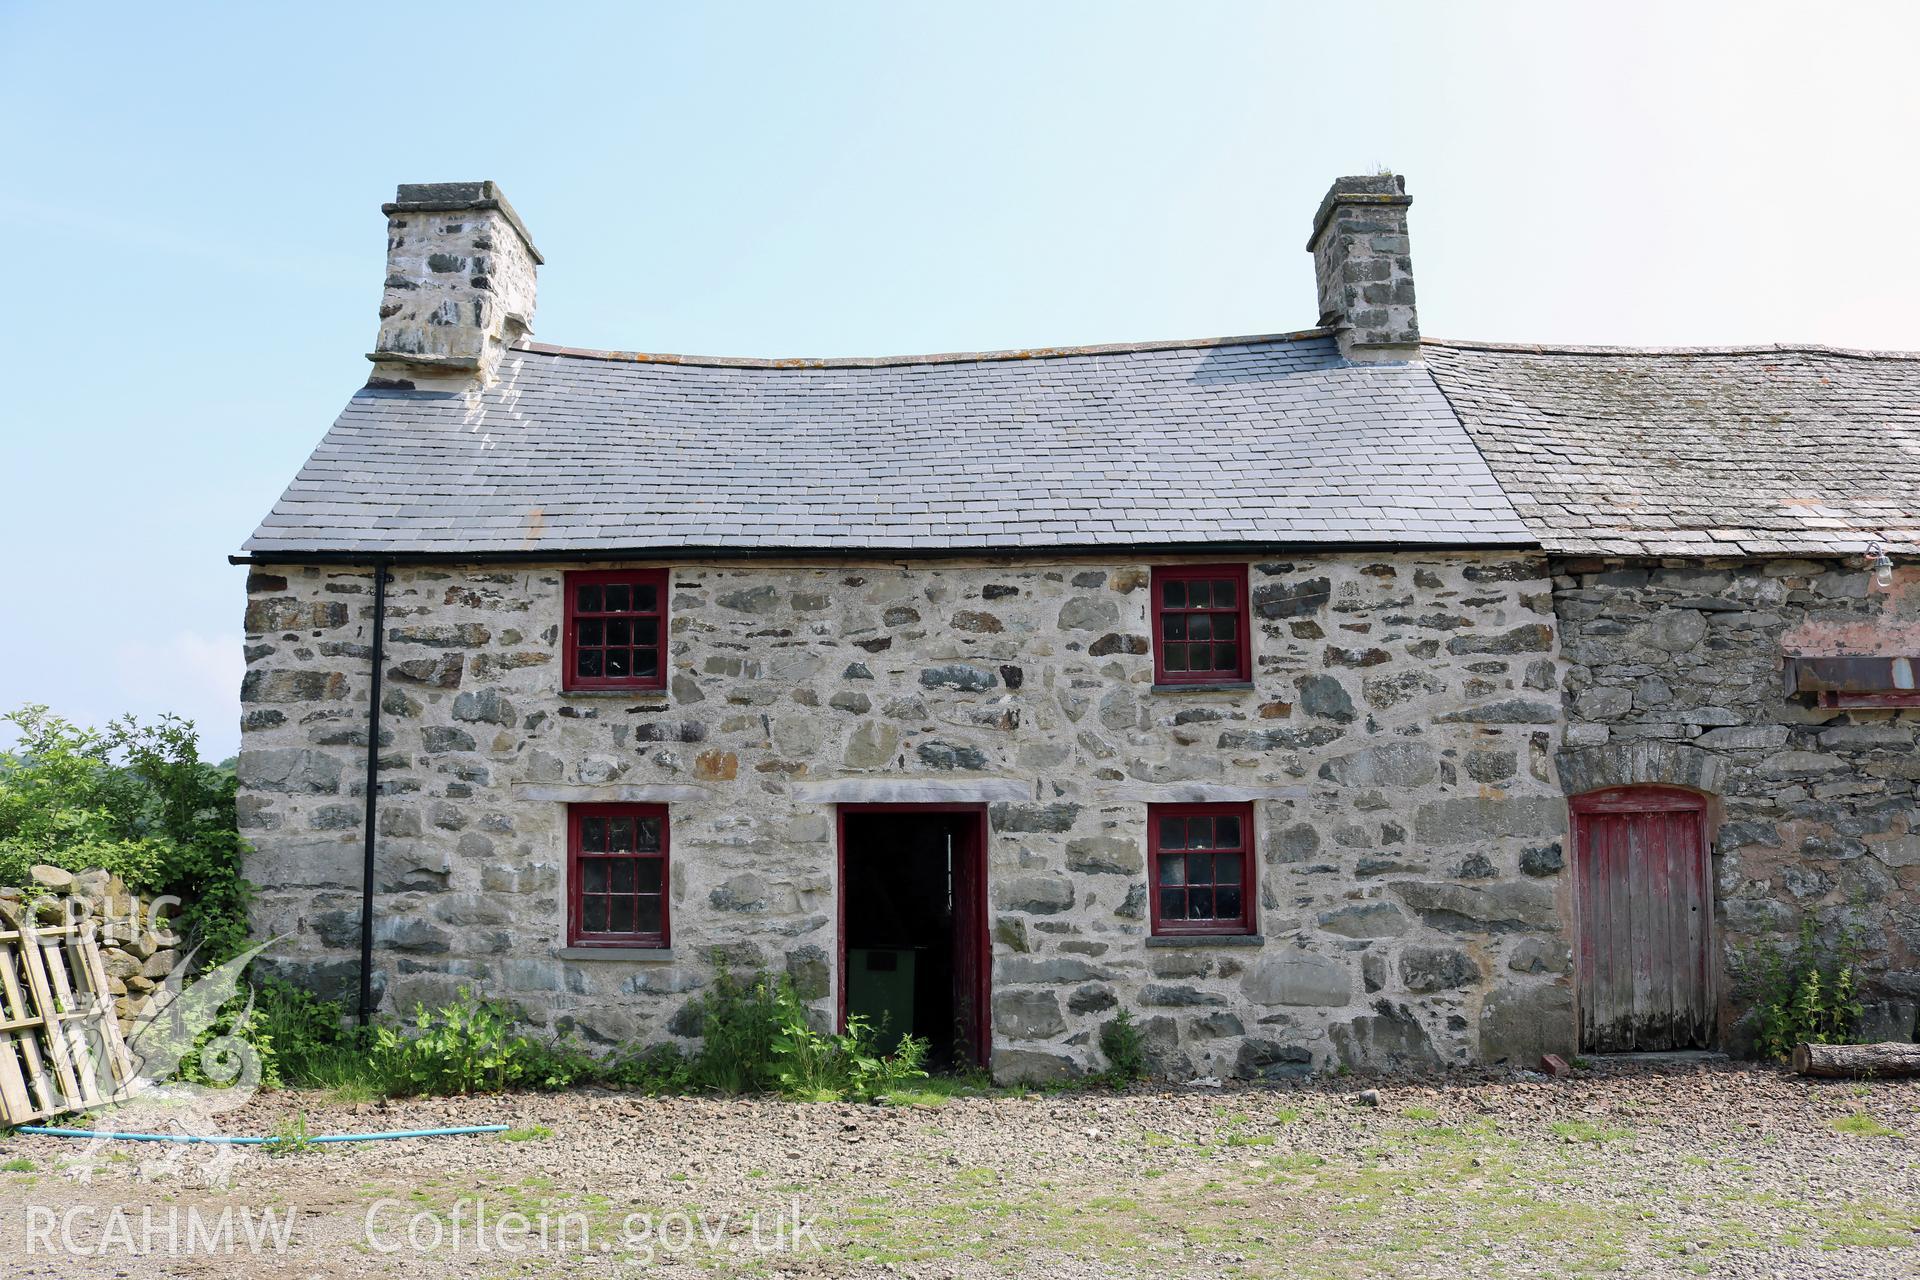 Photograph showing exterior view of barn and cottage at Maes yr Hendre, taken by Dr Marian Gwyn, 6th July 2016. (Original Reference no. 0028)